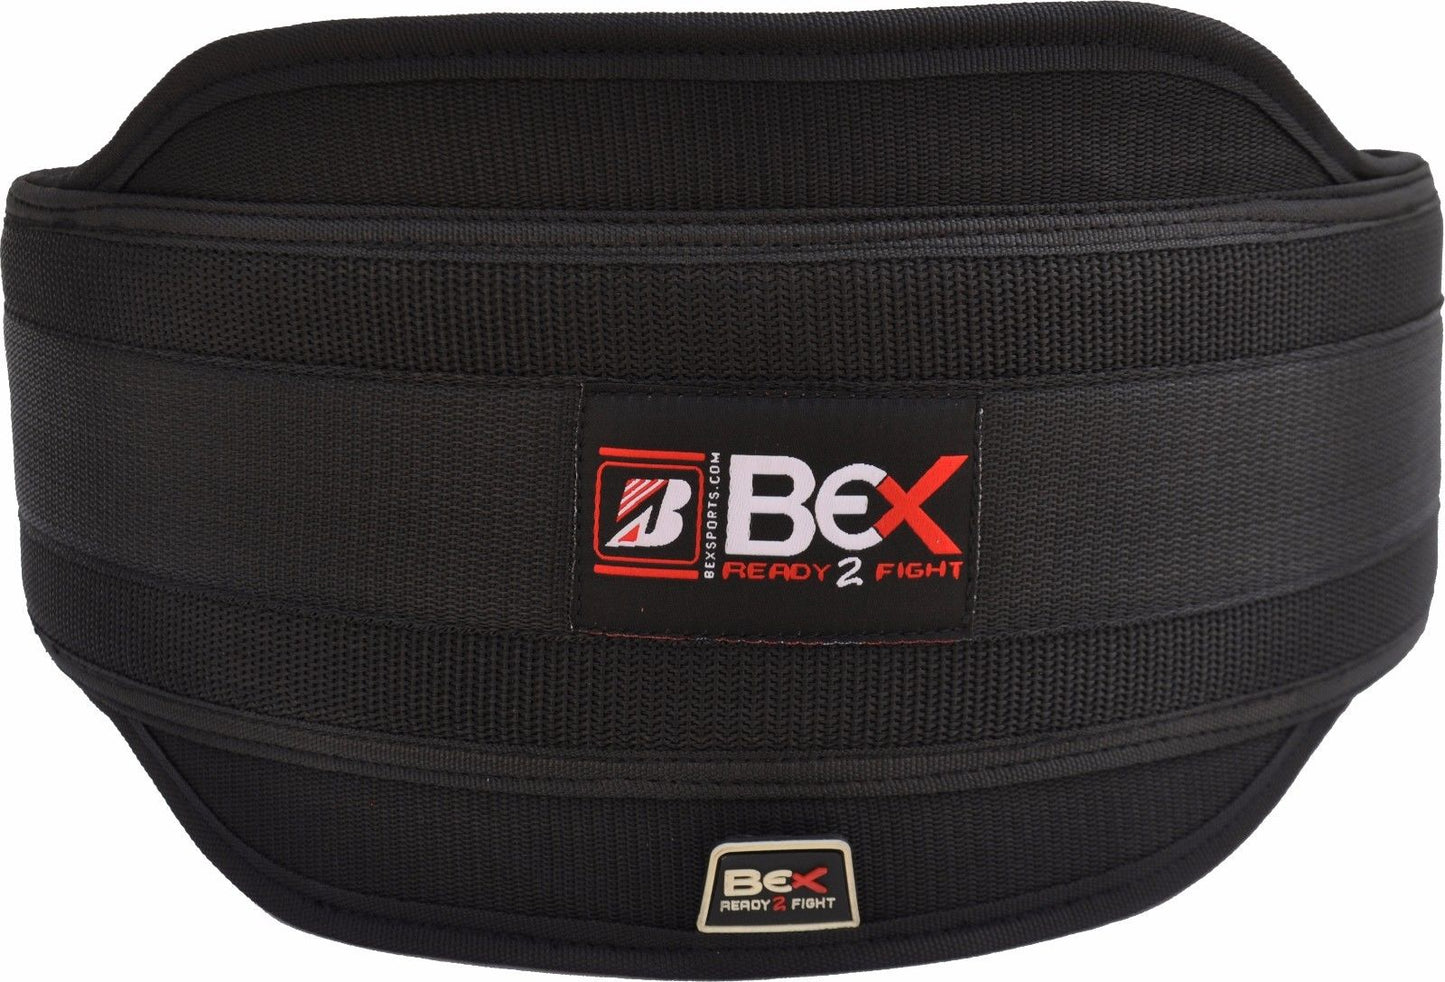 Premium Gym, Weight Lifting, Power Belts for Elite Performance